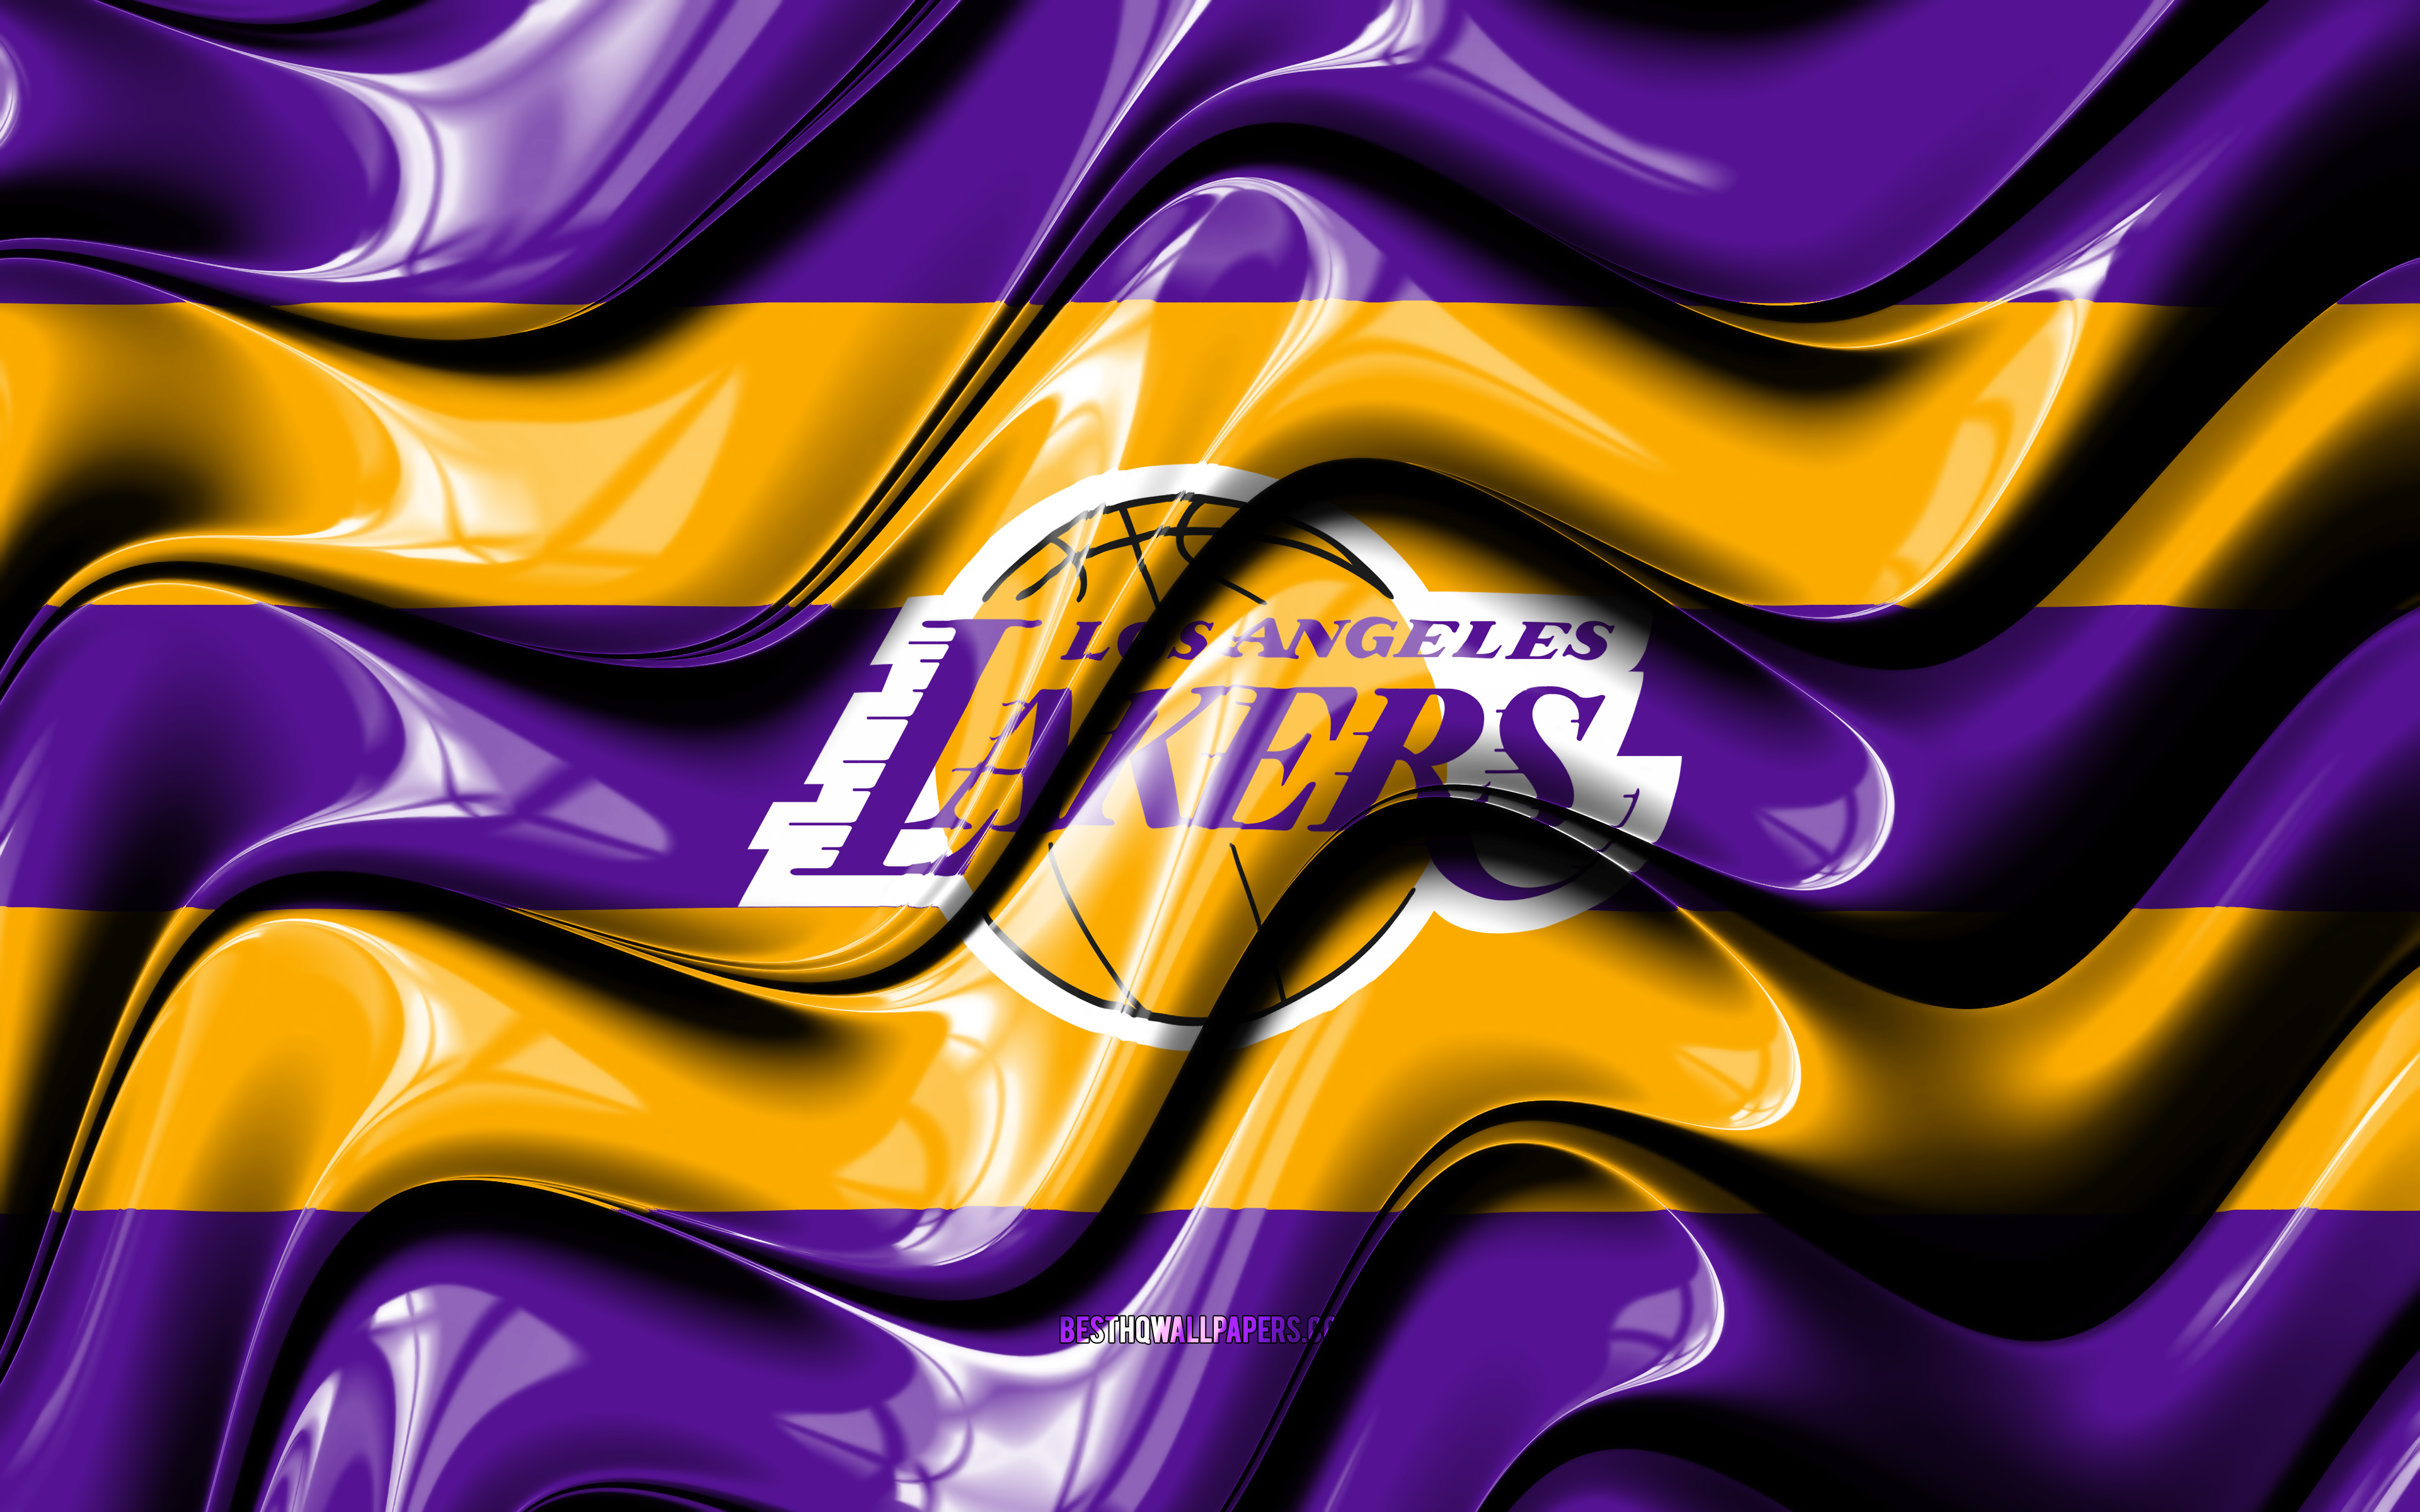 Download wallpaper Los Angeles Lakers flag, 4k, violet and yellow 3D waves, NBA, american basketball team, Los Angeles Lakers logo, basketball, Los Angeles Lakers, LA Lakers for desktop with resolution 3840x2400. High